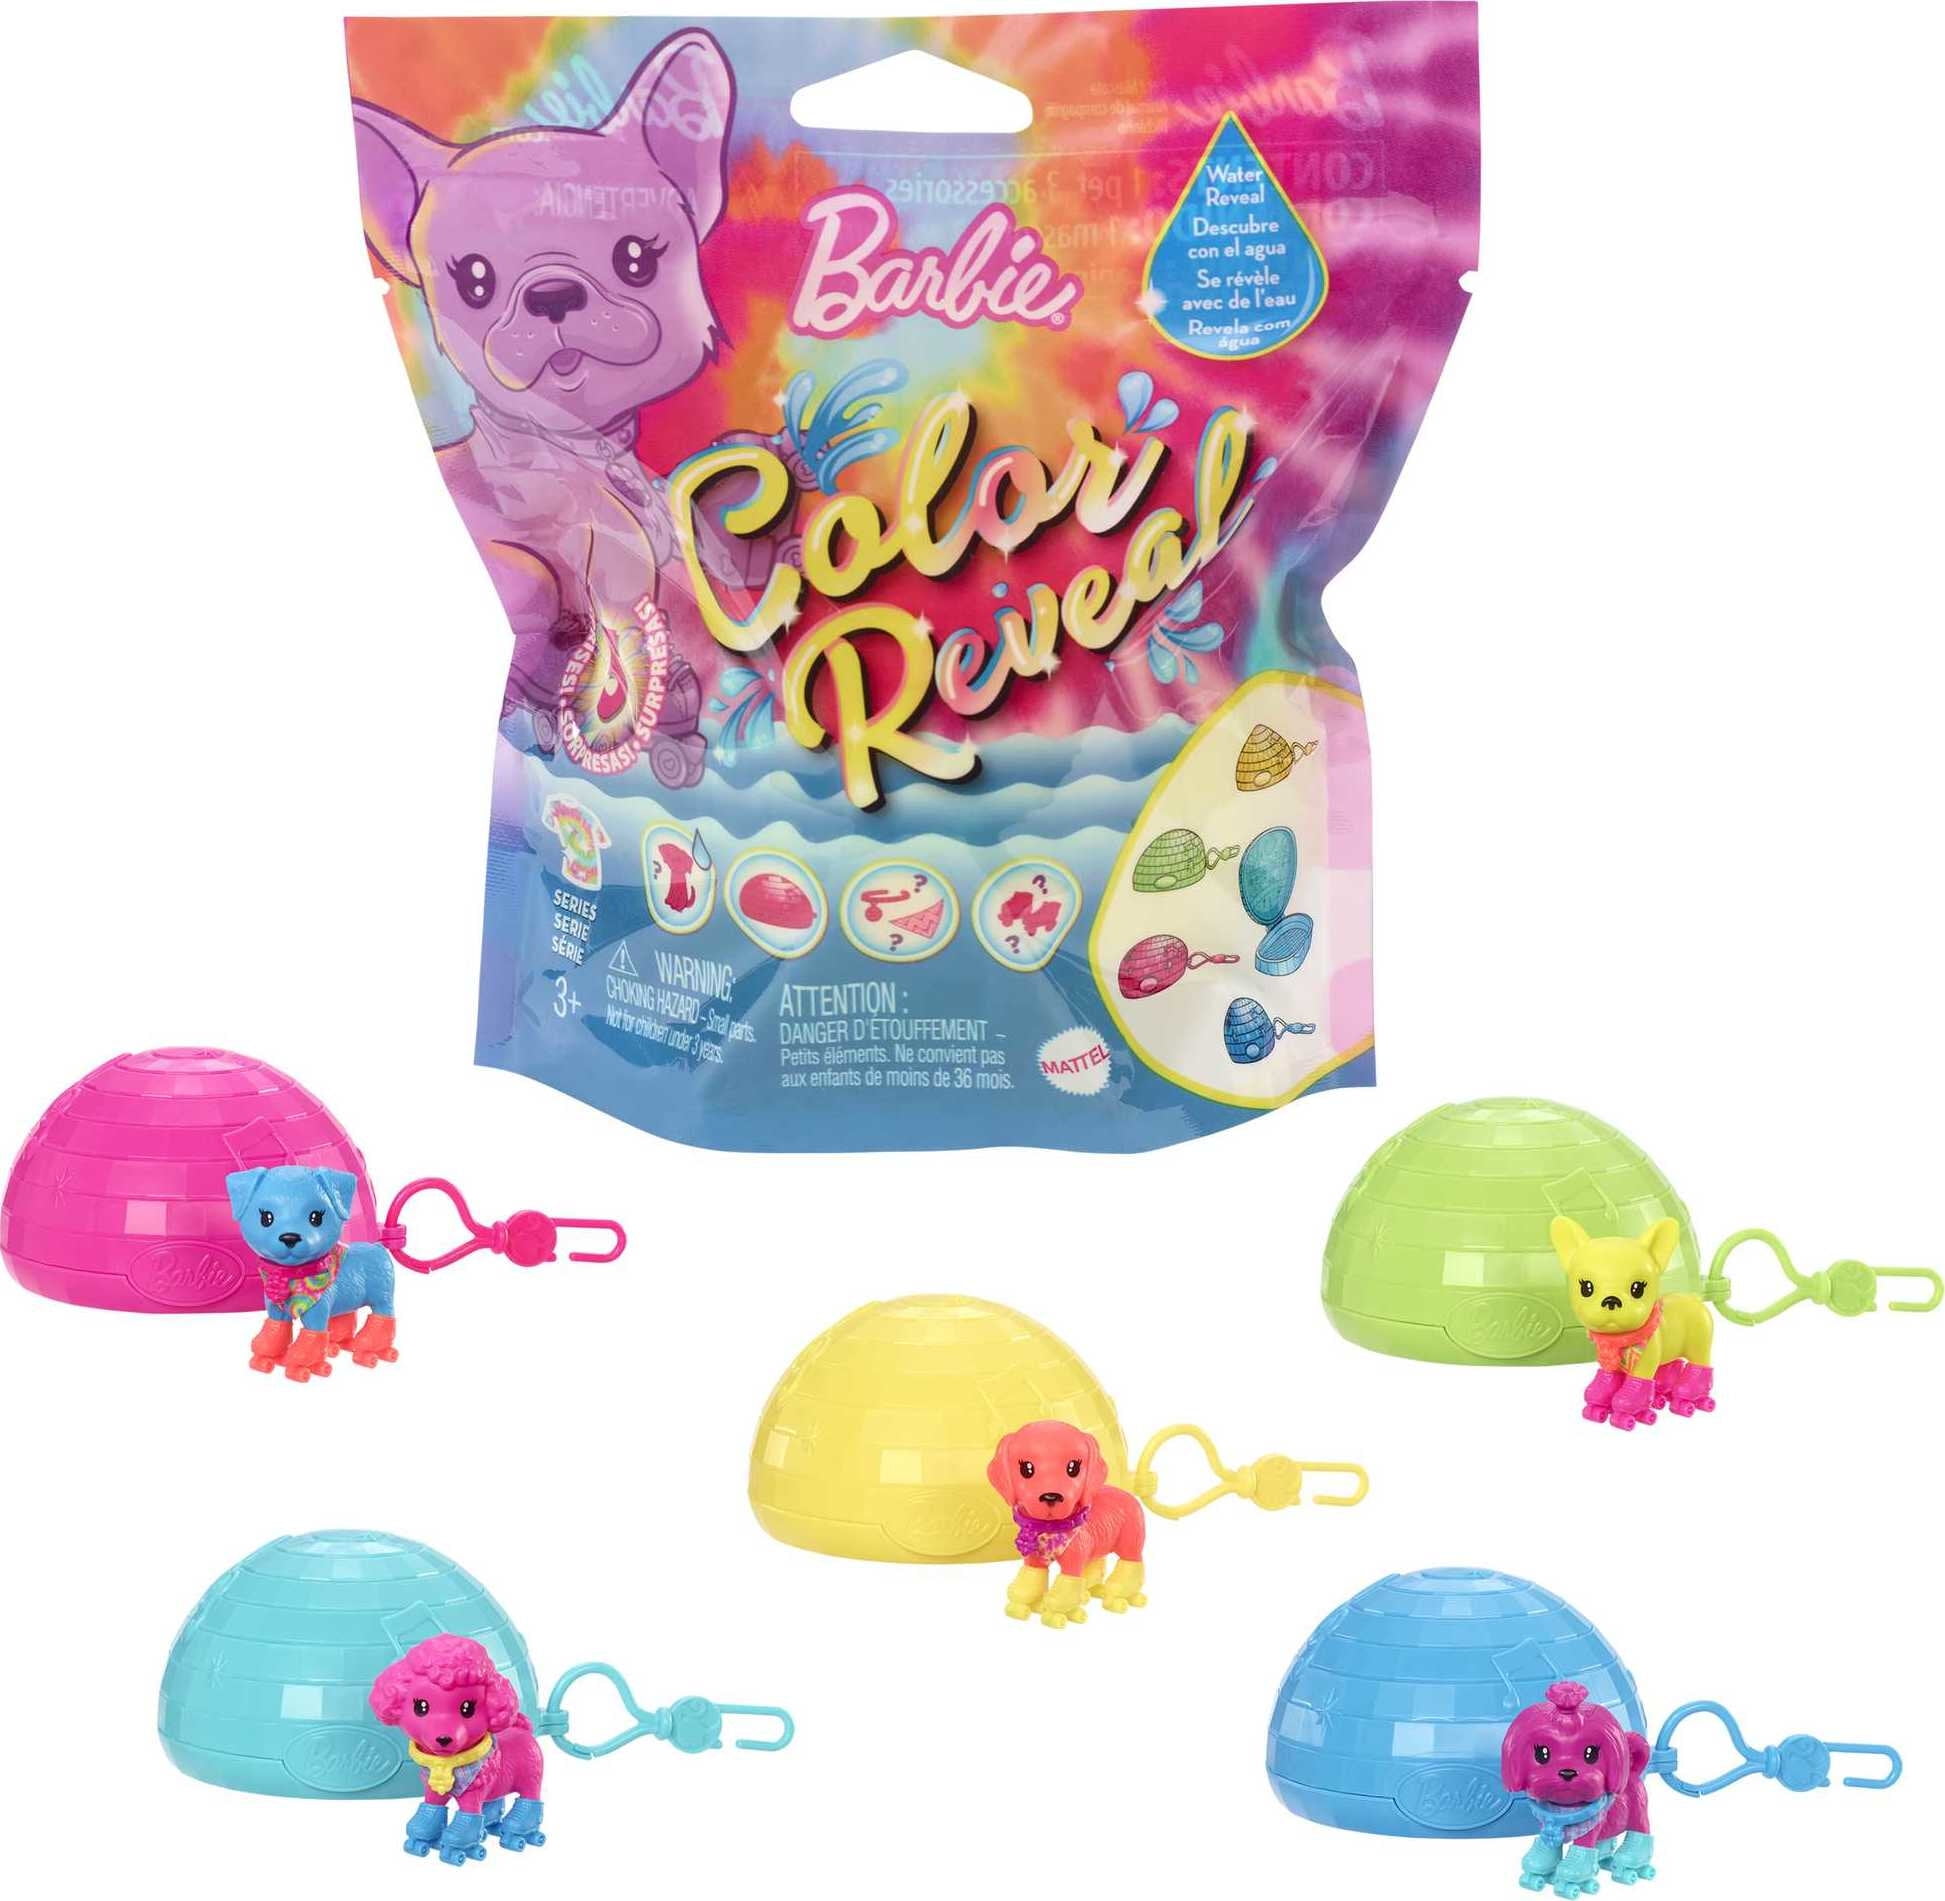 Barbie Color Reveal Pets with Fluorescent Green Coating, Neon Tie-Dye Series (Styles May Vary)